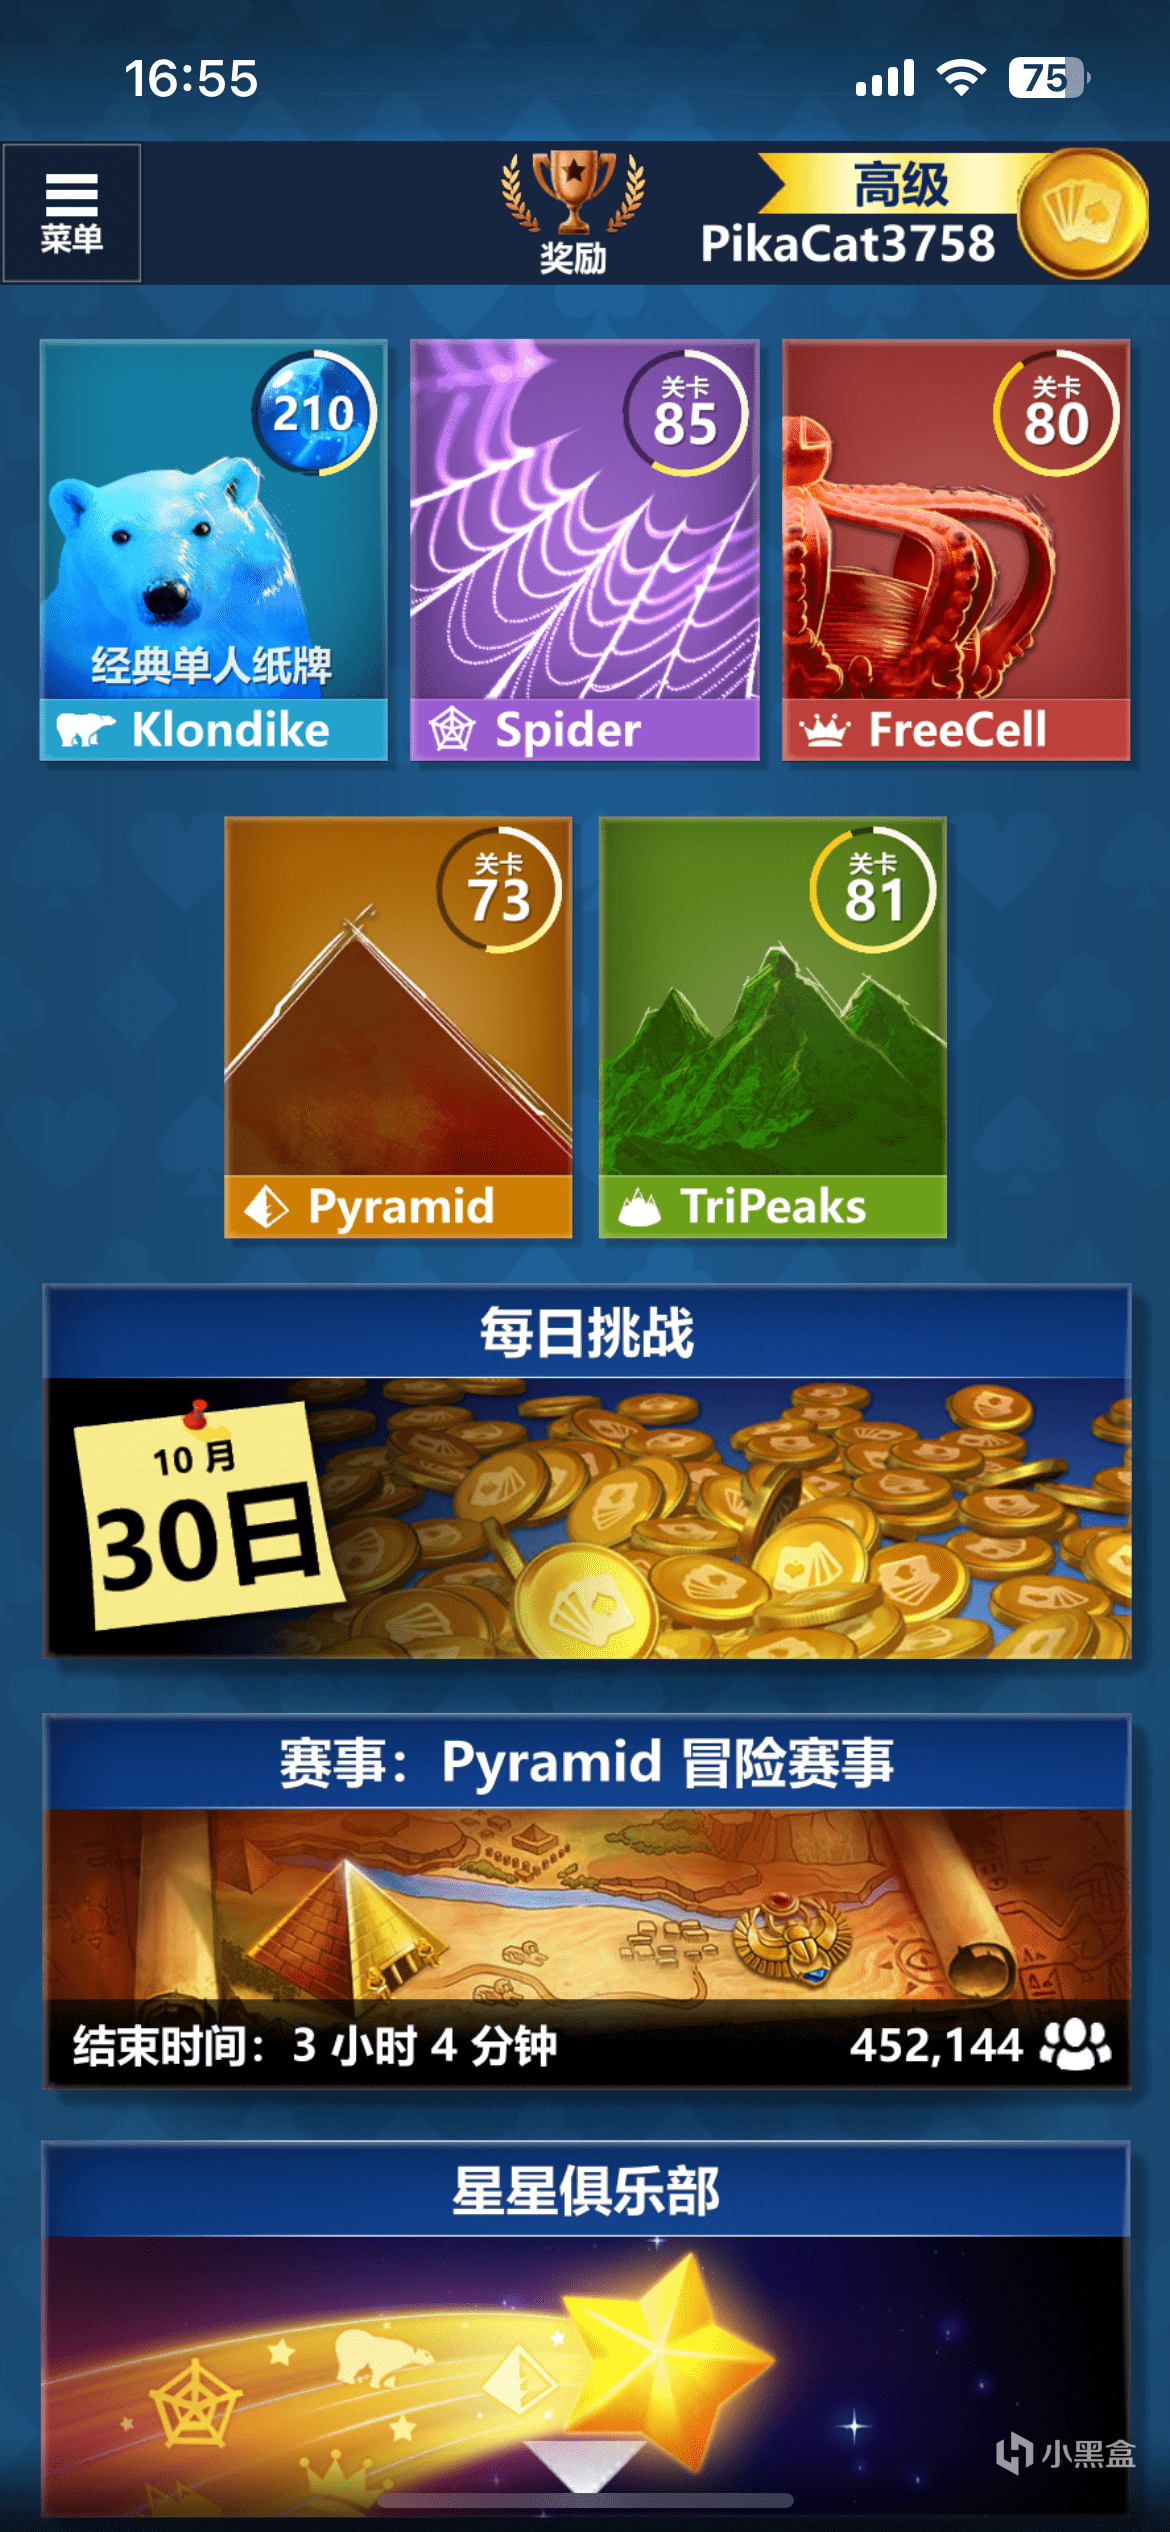 【Microsoft Solitaire】Microsoft Solotaire Collection 微軟紙牌合集遊戲體驗-第2張